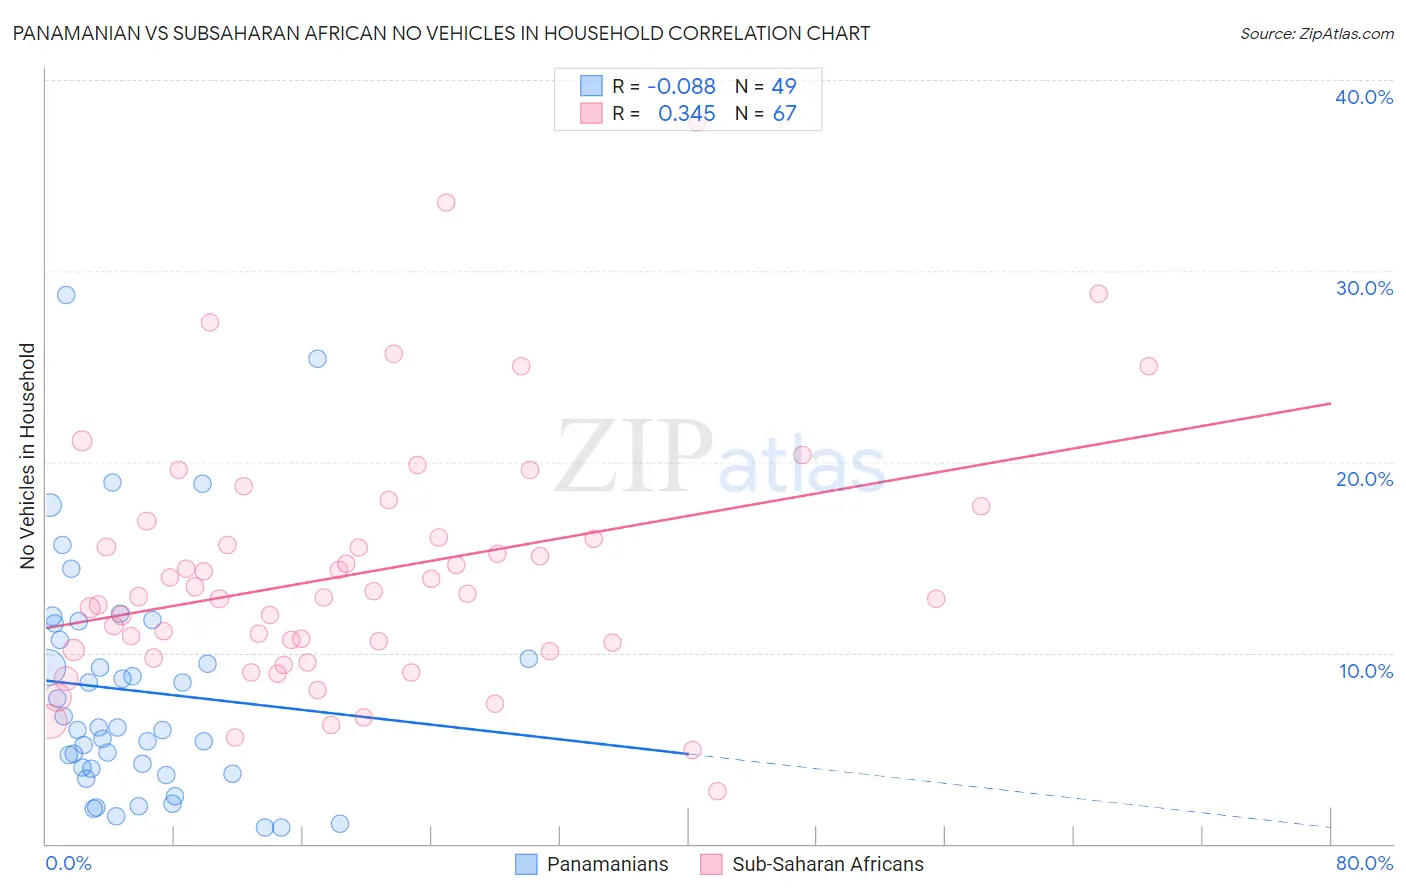 Panamanian vs Subsaharan African No Vehicles in Household